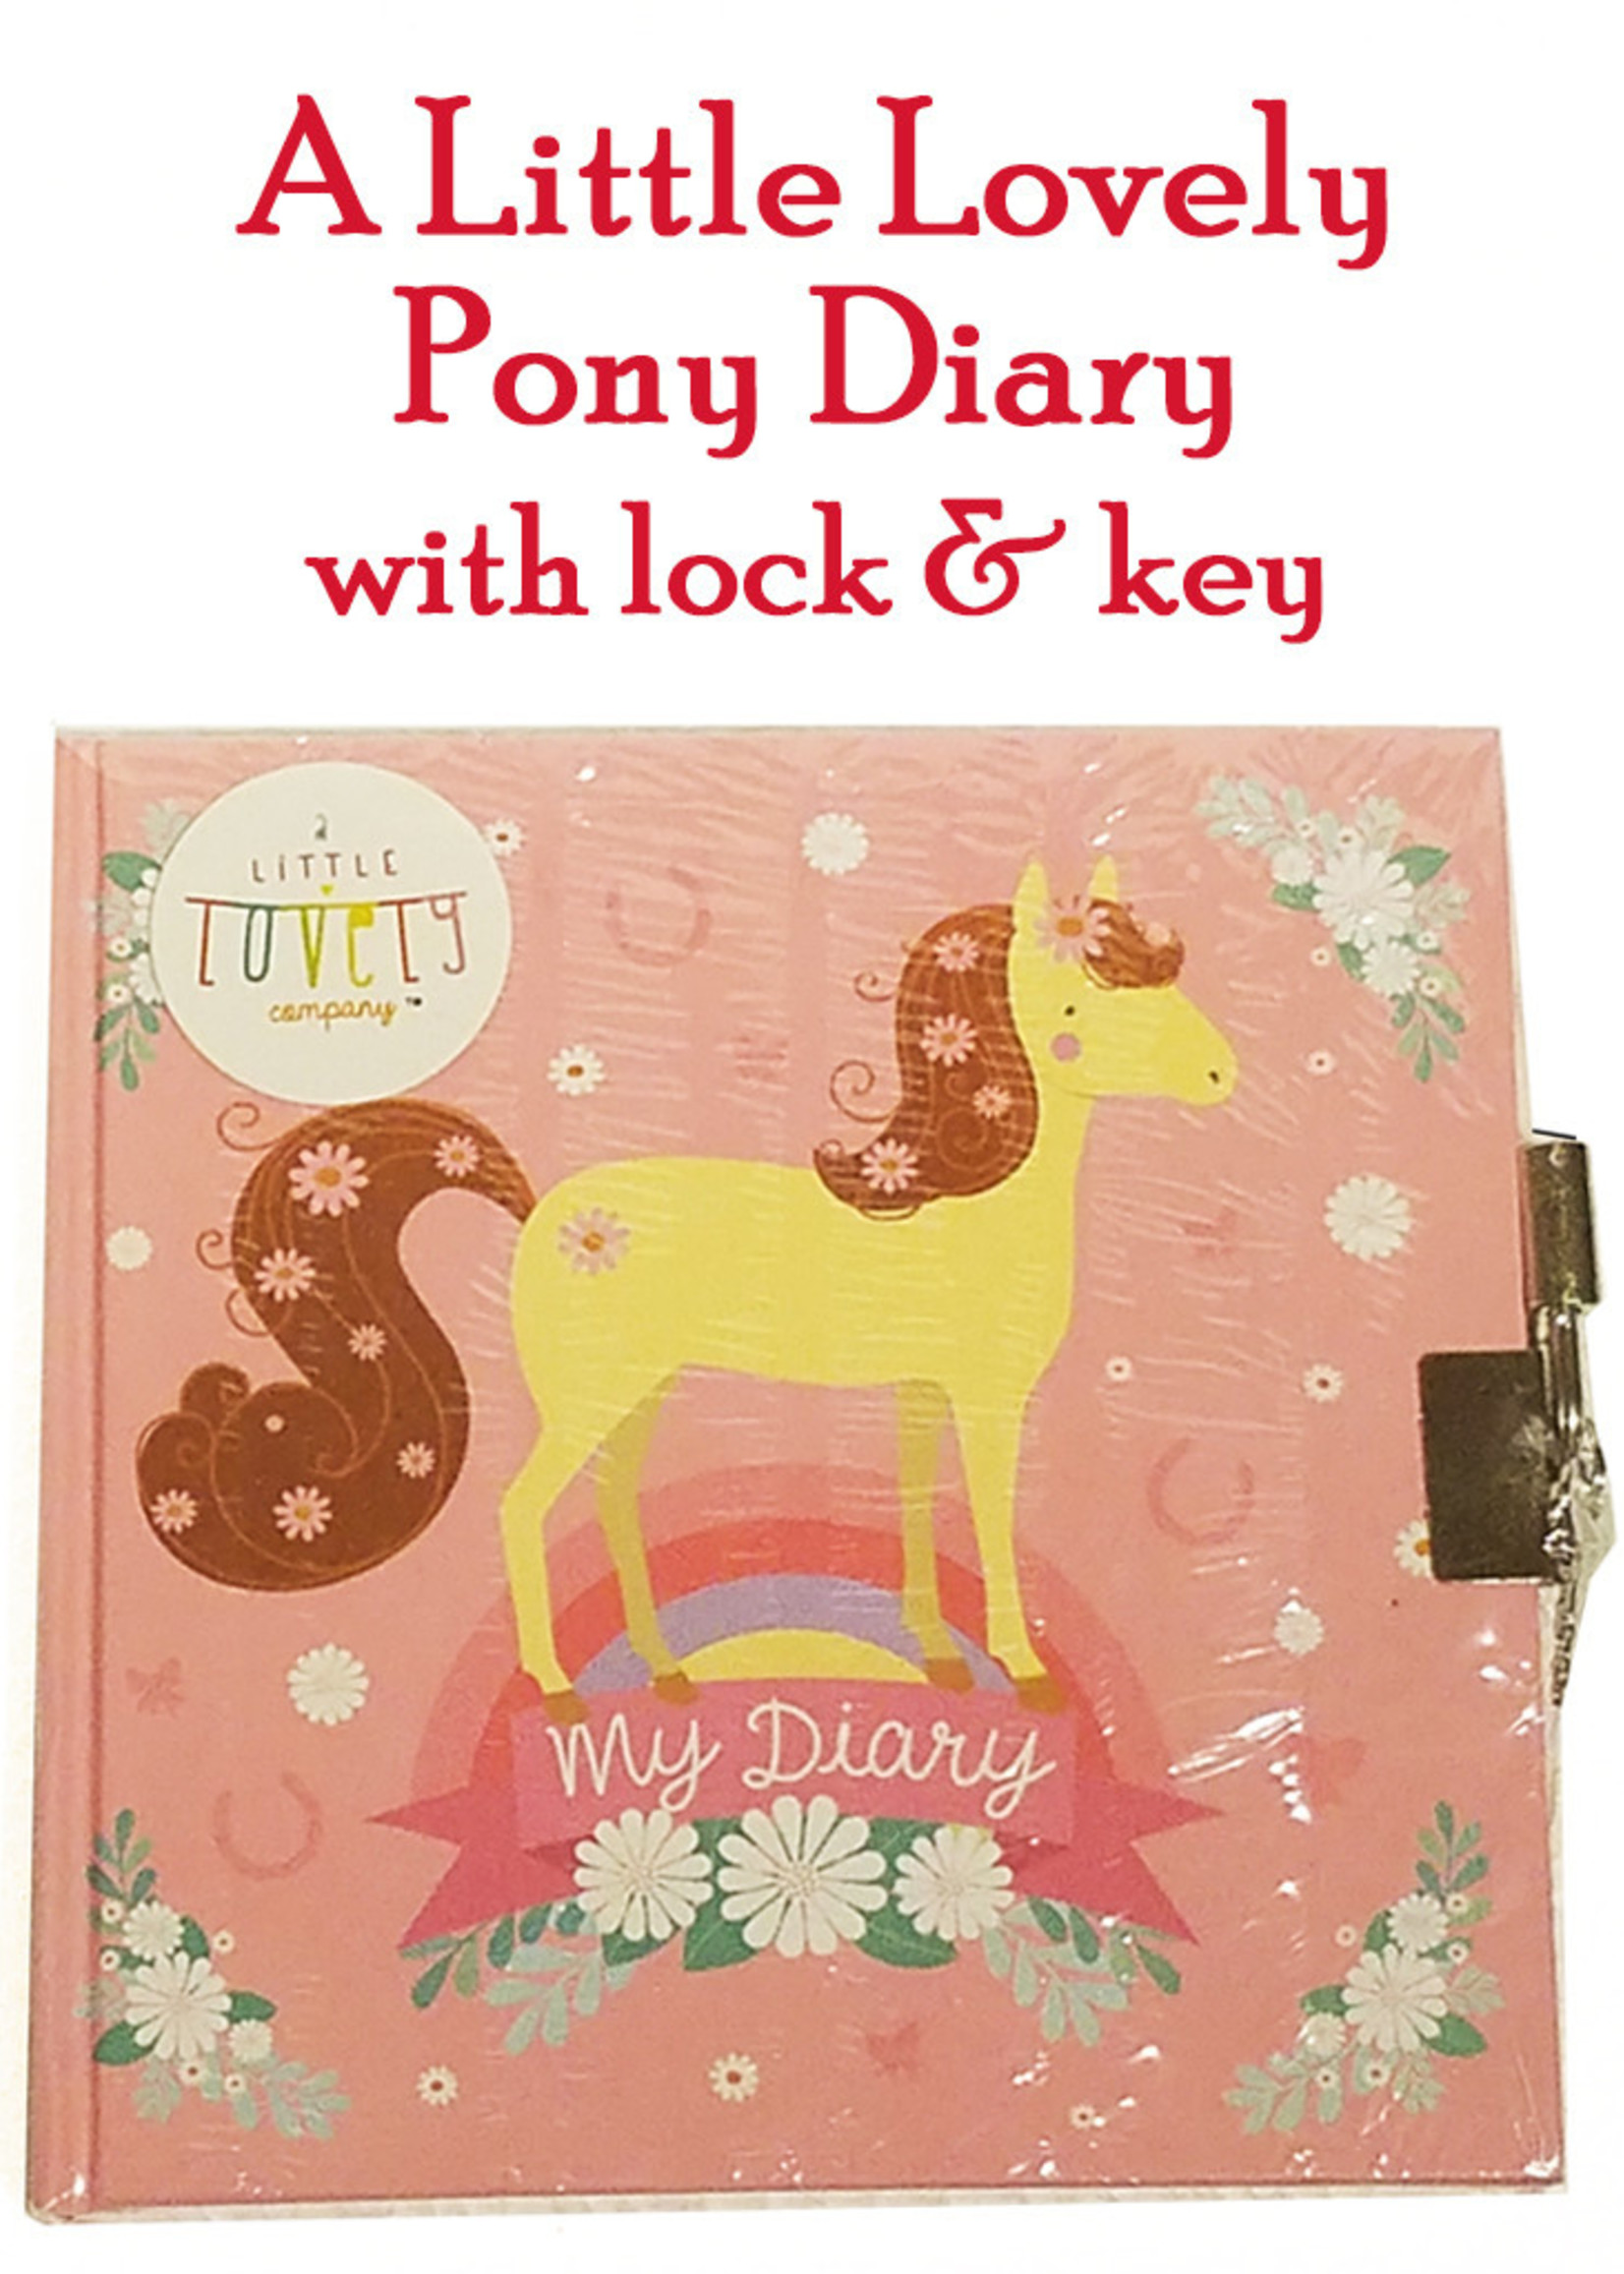 A Little Lovely My Diary: Pony, Locking